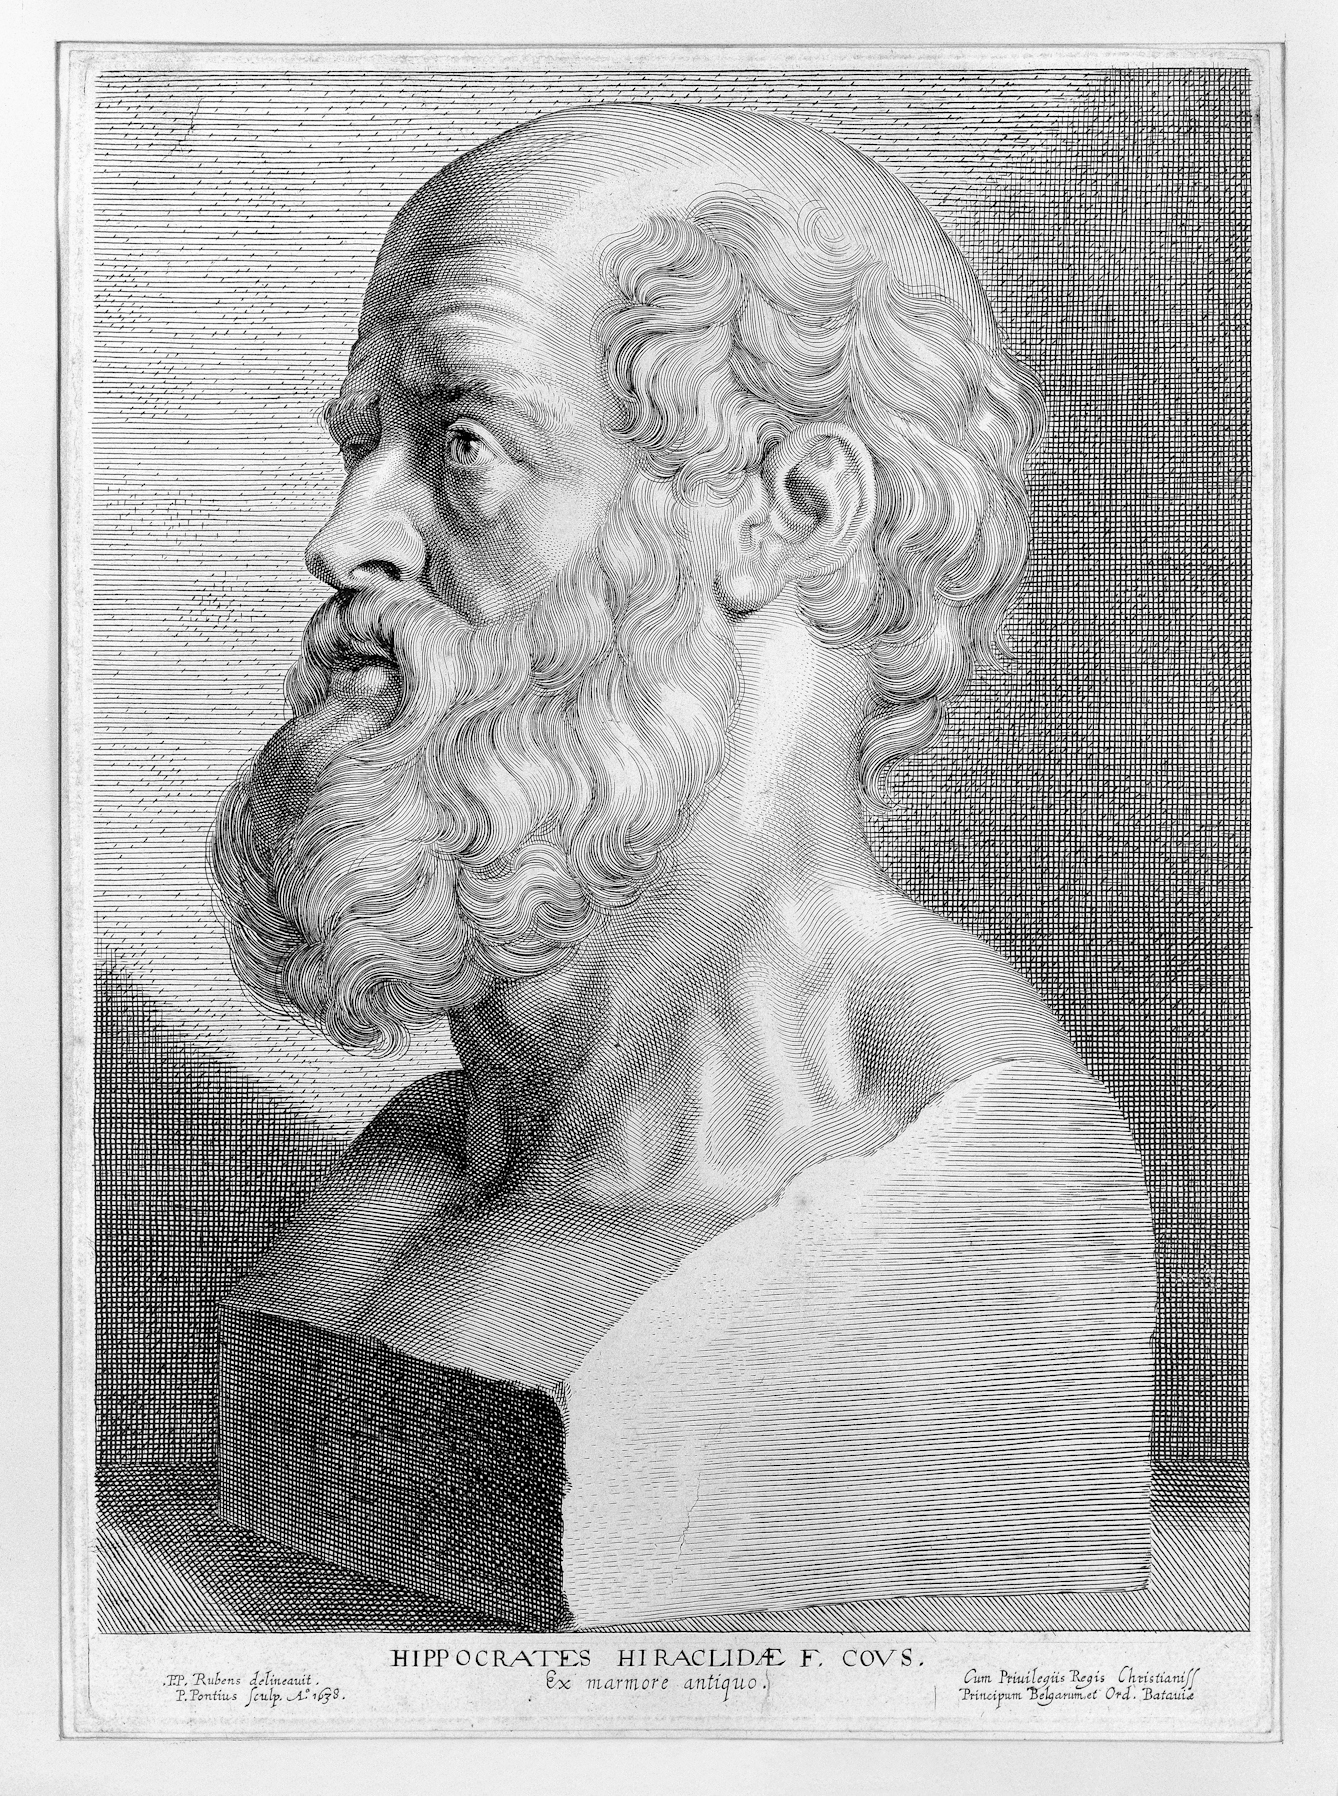 Black and white engraving showing the bust of a balding man with a beard.